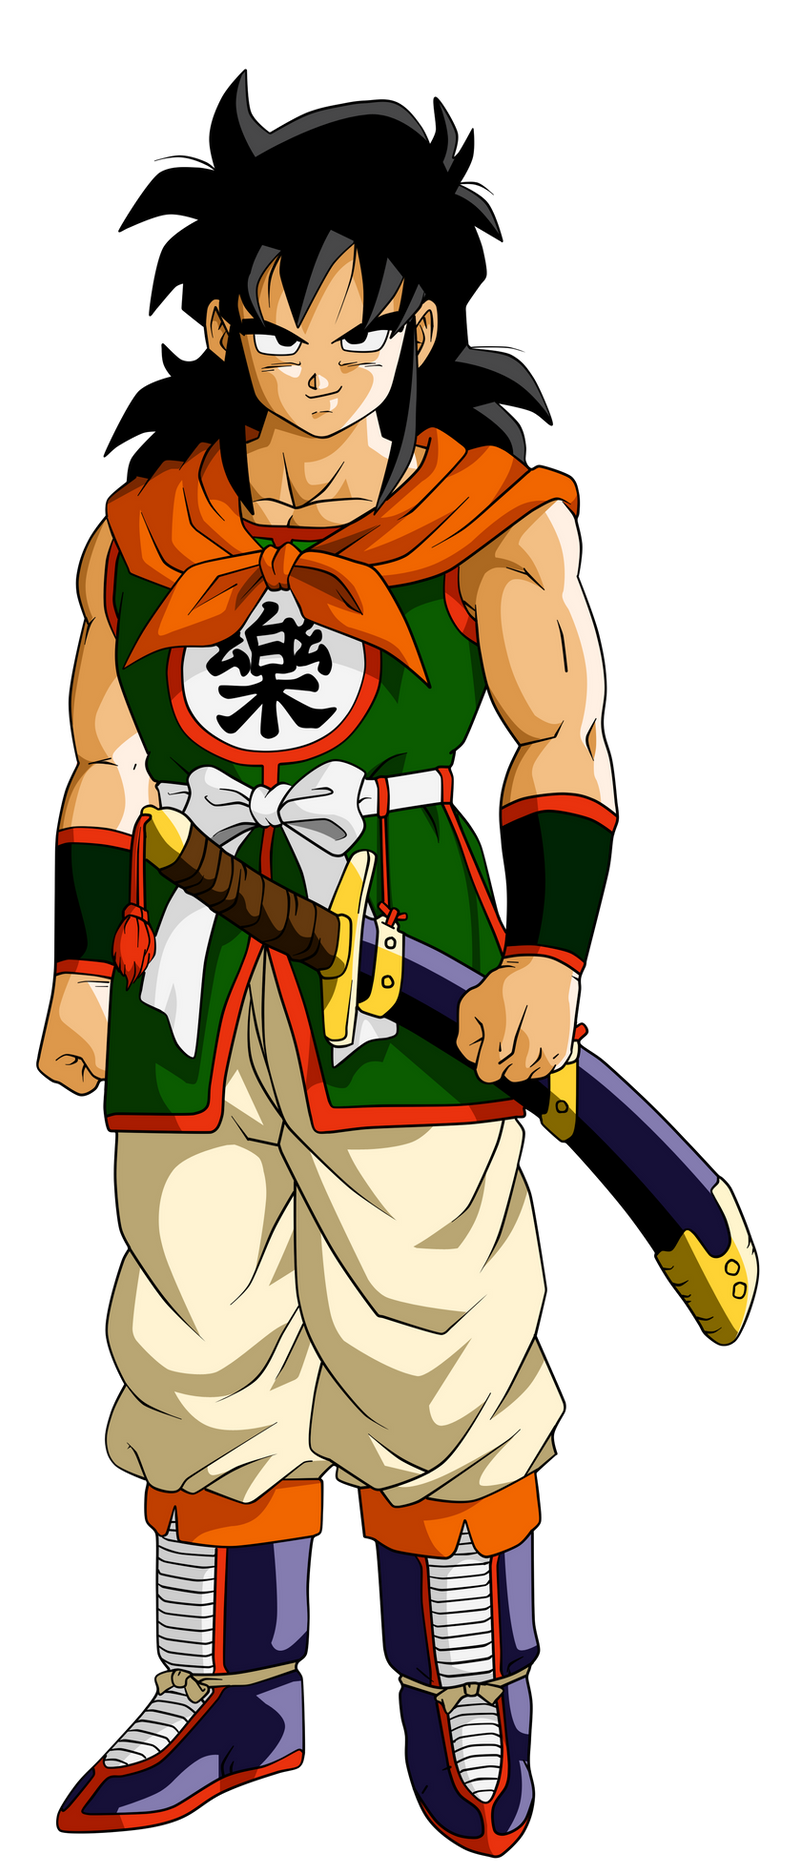 Download Colored 010 - Yamcha 001 by VICDBZ on DeviantArt